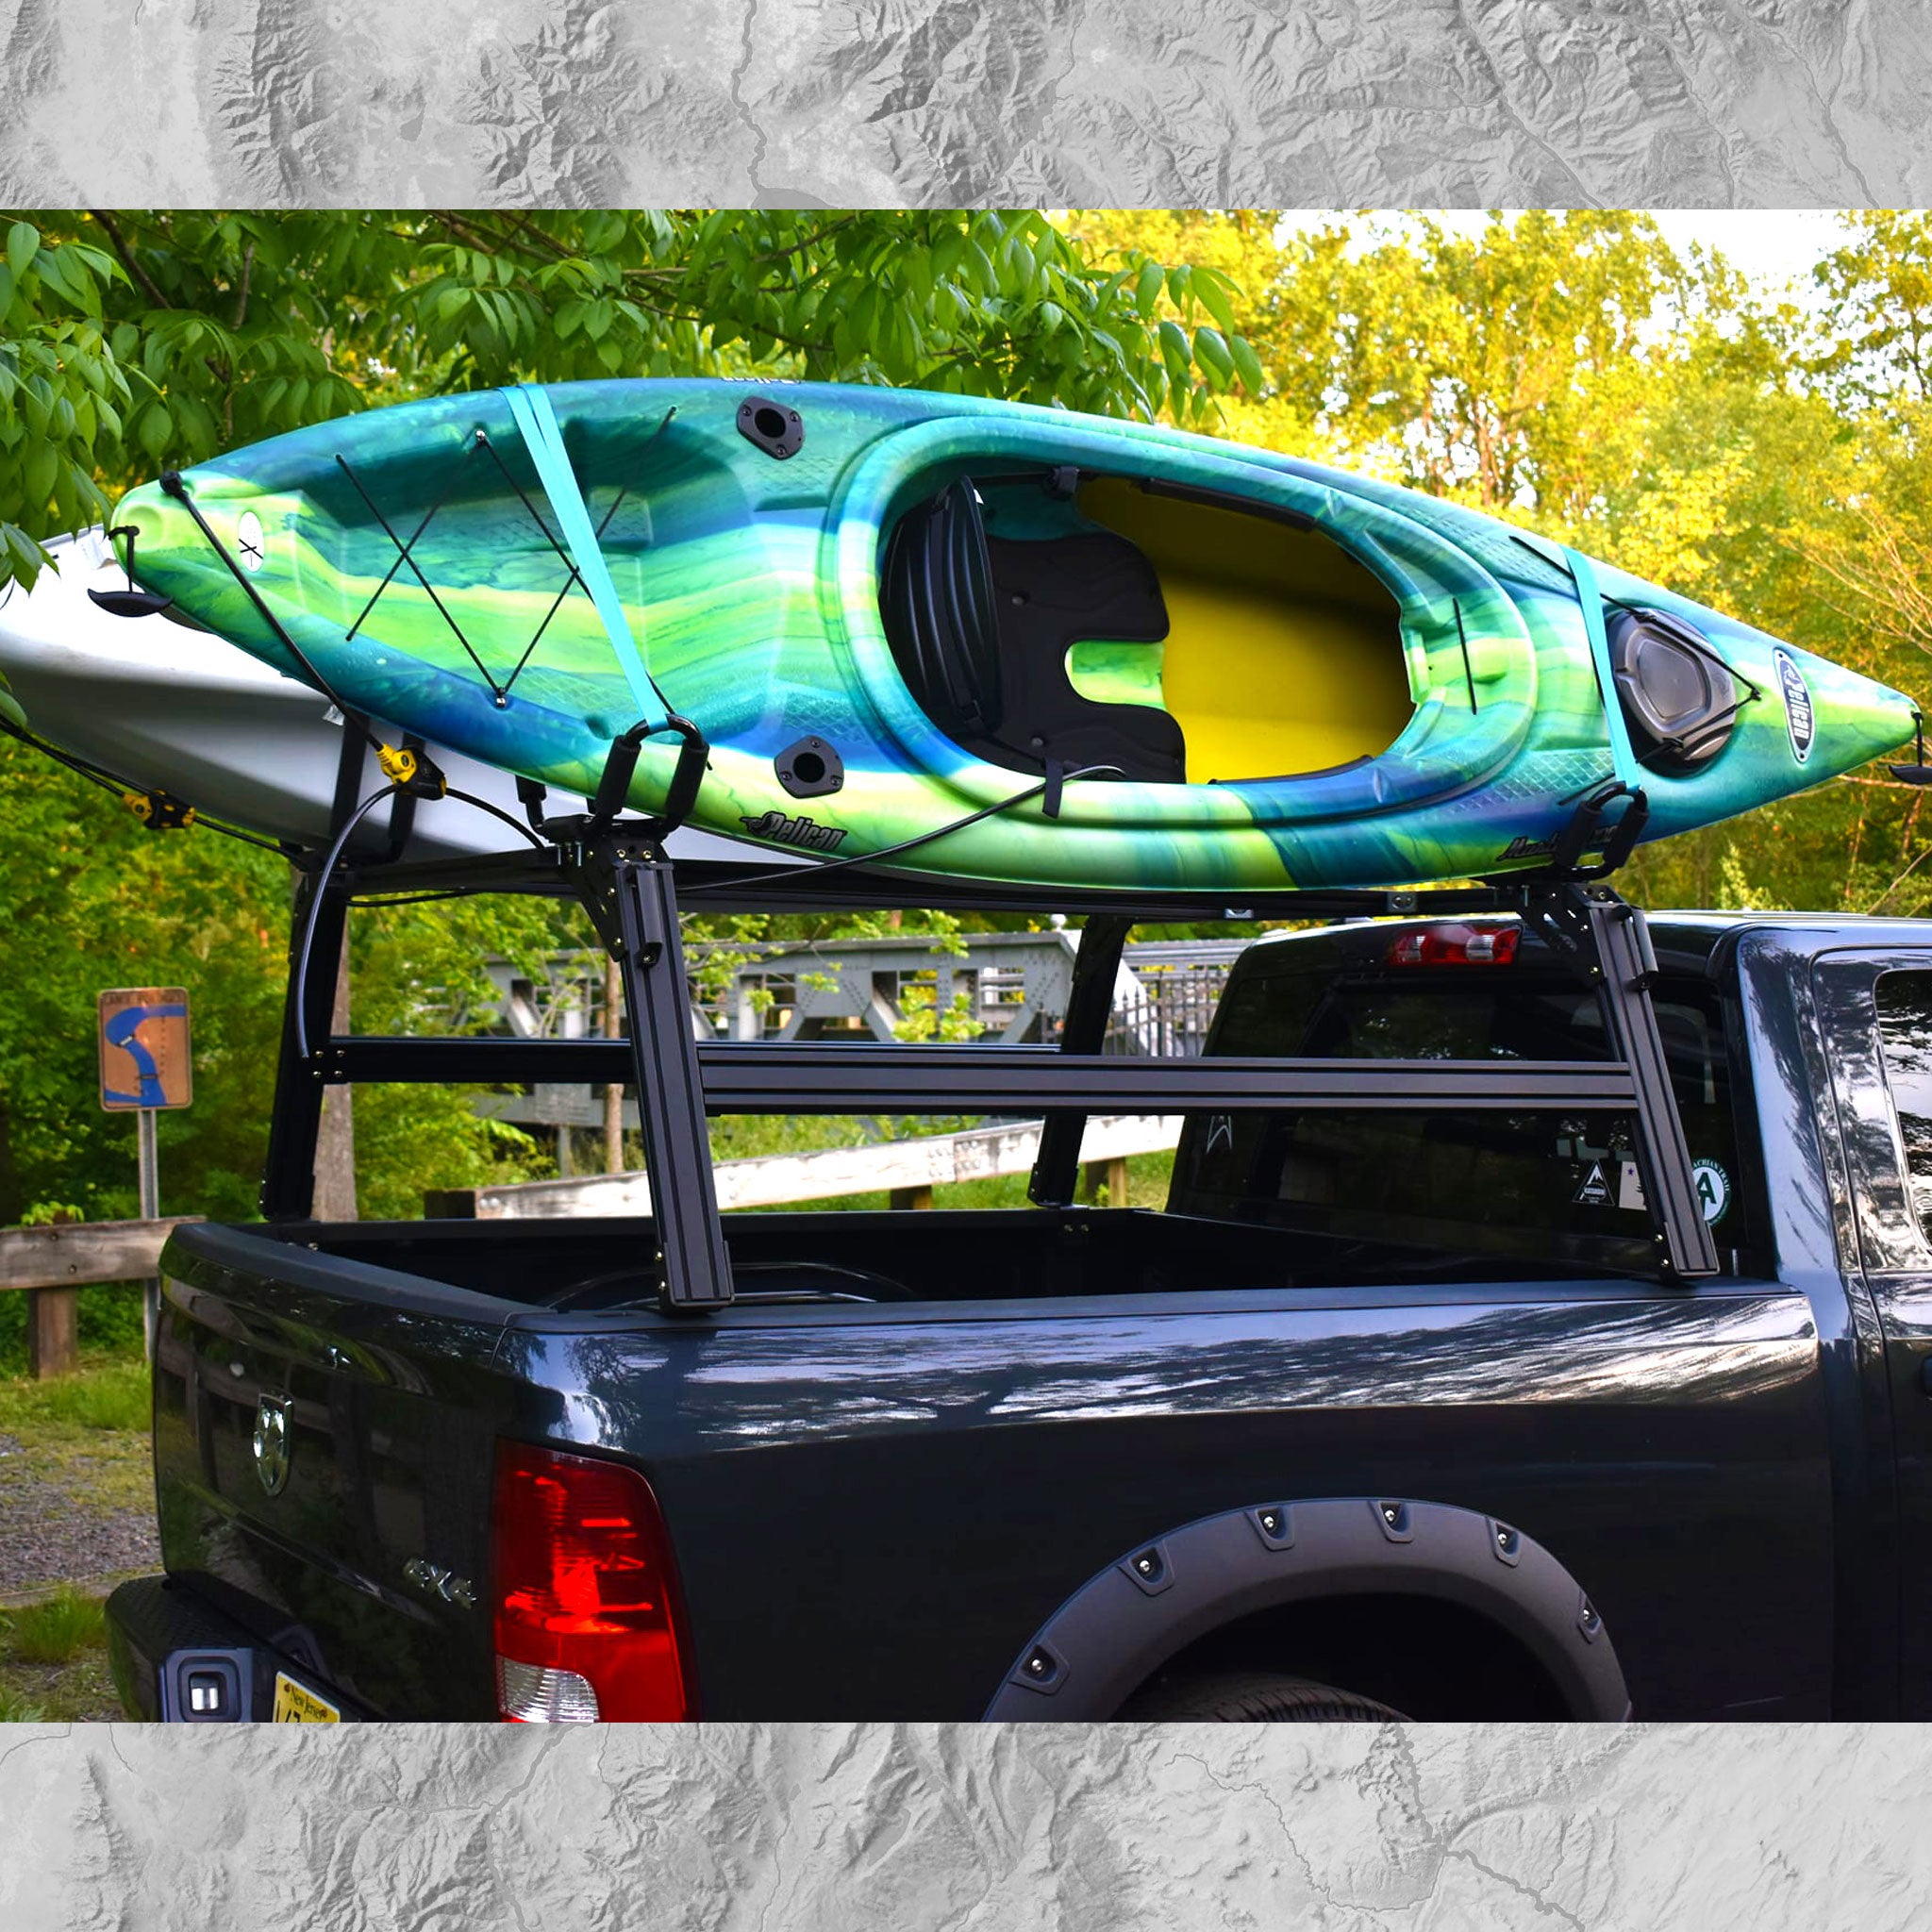 Dodge Ram 1500 with XTR1 Xtrusion Bed Rack with mounted Kayaks